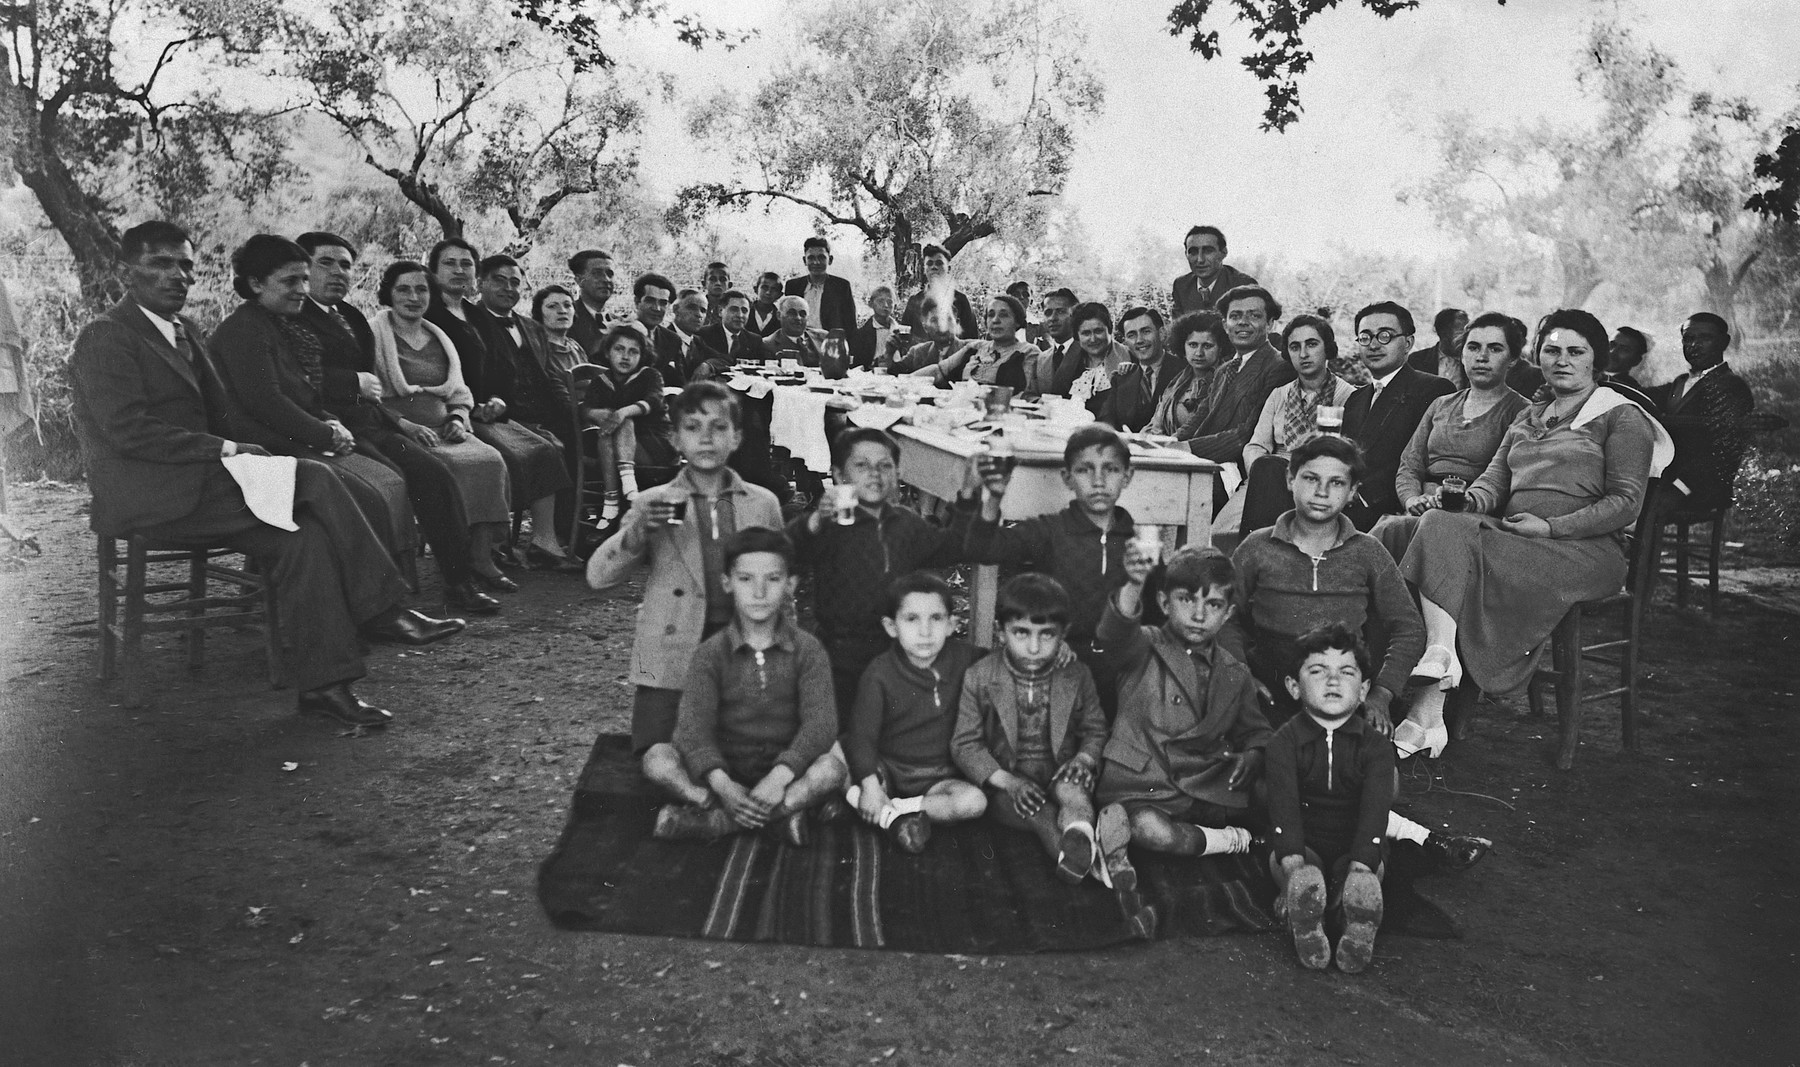 Employees and family of the National Bank of Greece in Arta gather for a group portrait during an outdoor celebration.

Michael Matsas is seated in the front, second from the left.  His parents, Leon and Esther Matsas, are seated behind him, third and fourth from the left.